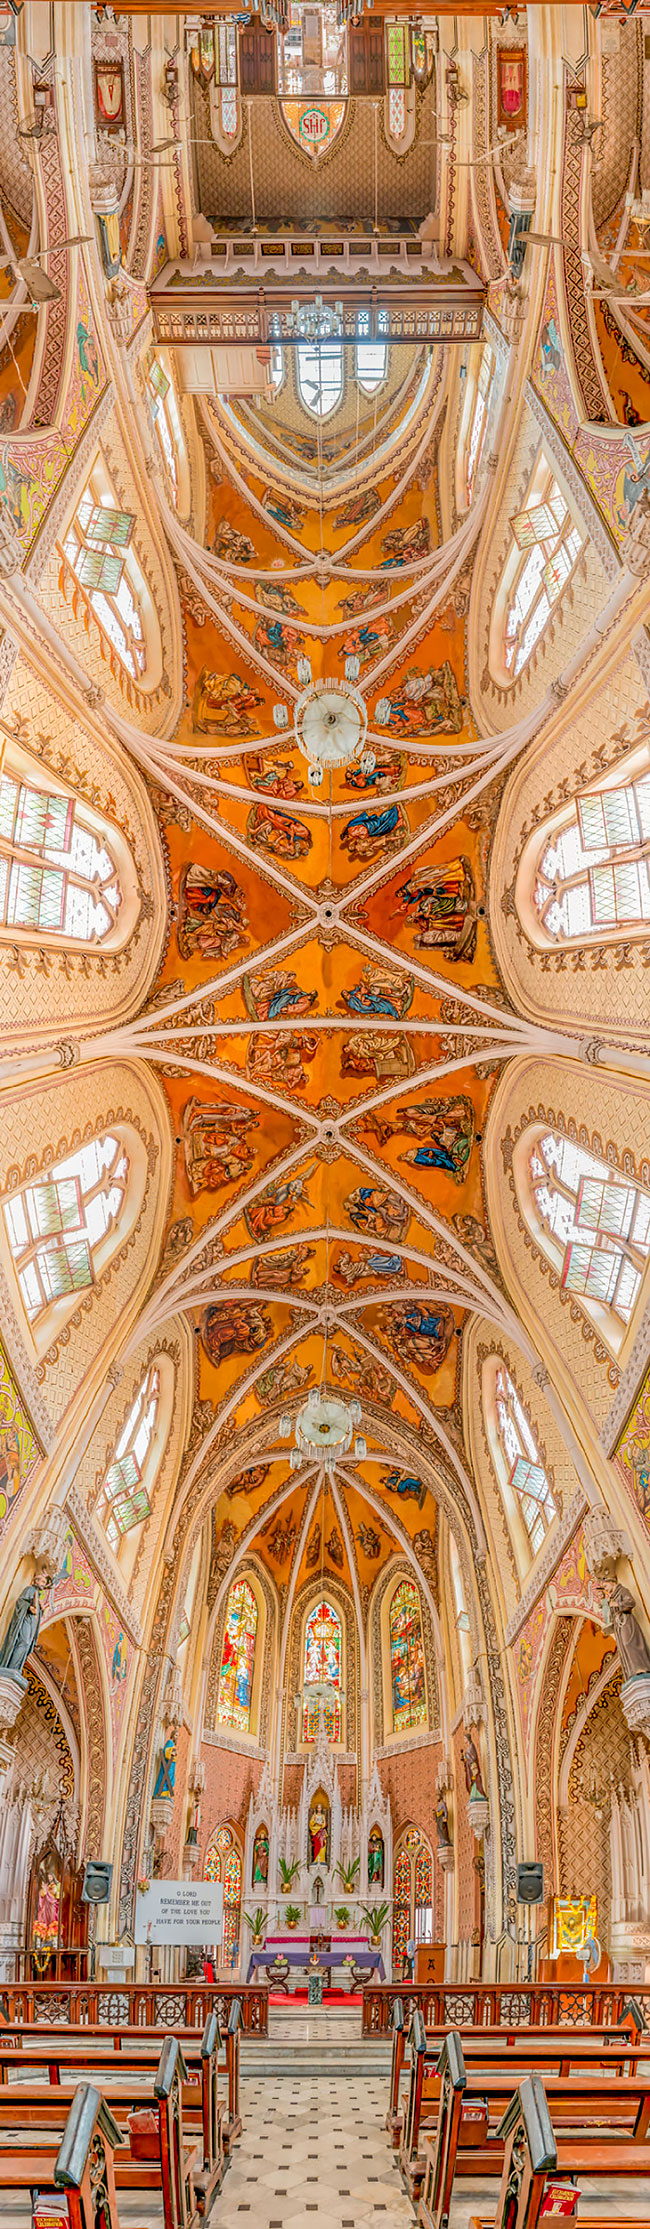 Richard Silver’s Stunning Vertical Panoramas of the Churches Around the World